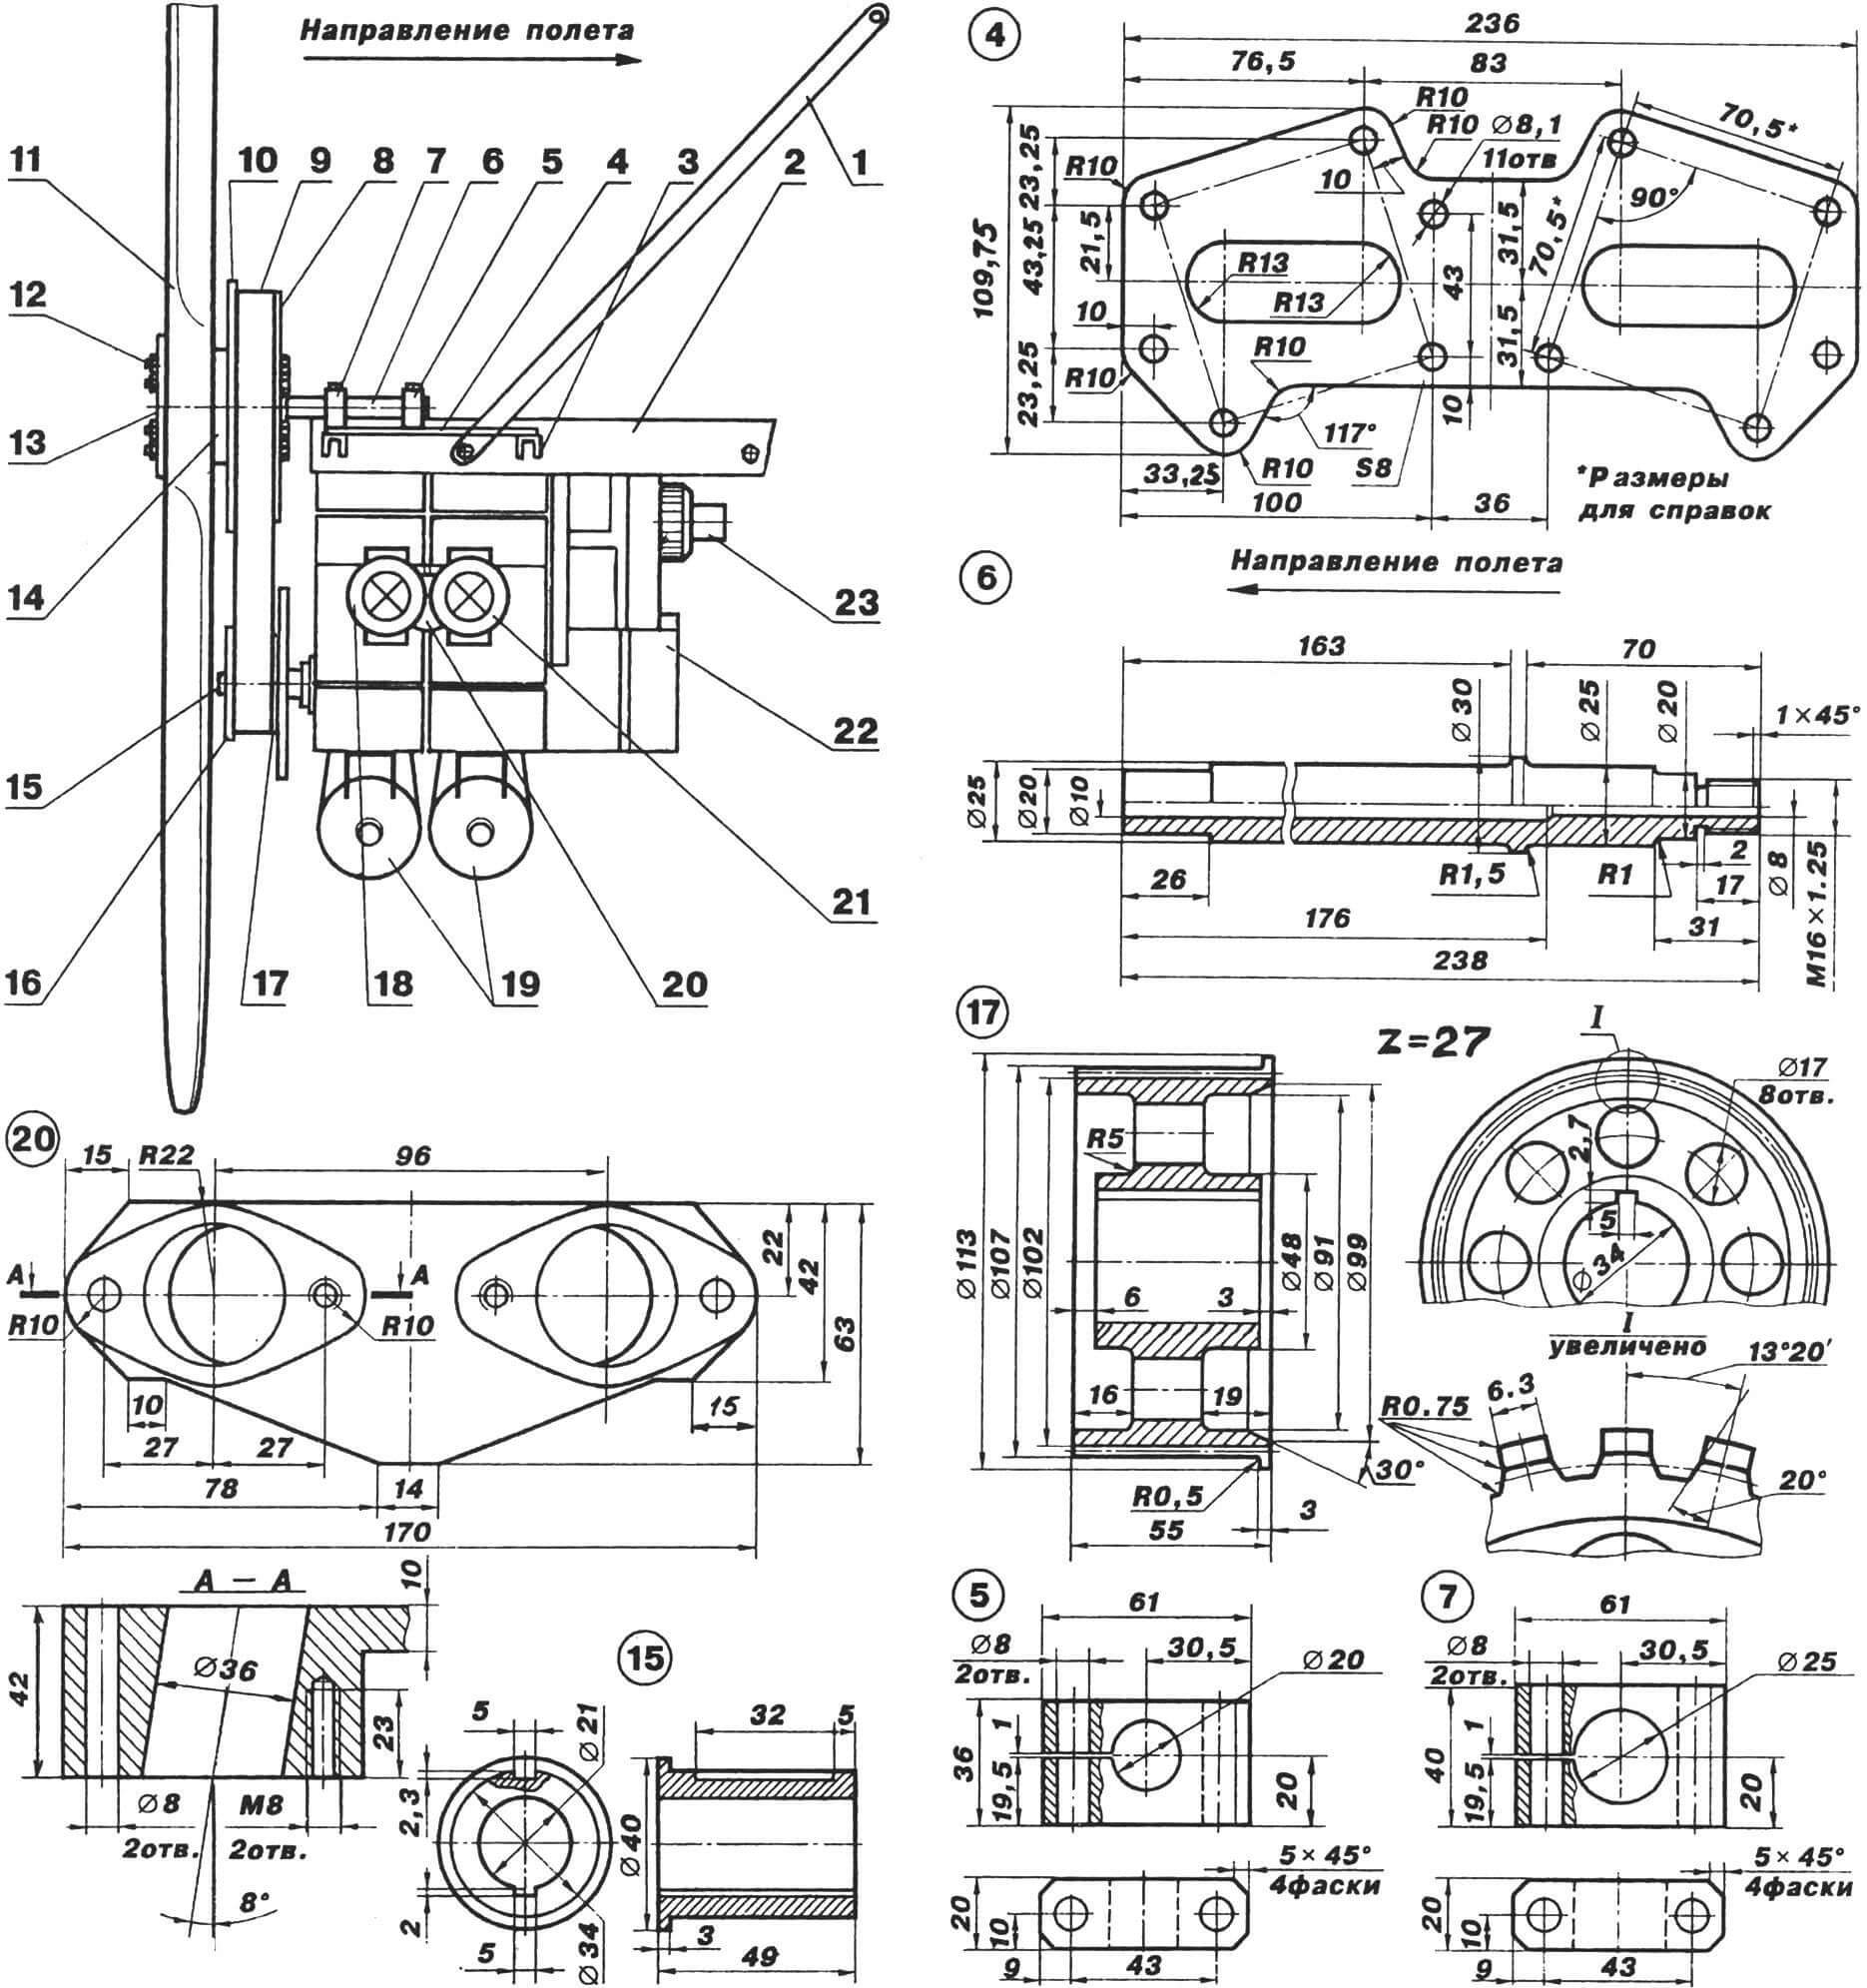 Arrangement of additional equipment on the engine and its frame (except for the liquid cooling system)